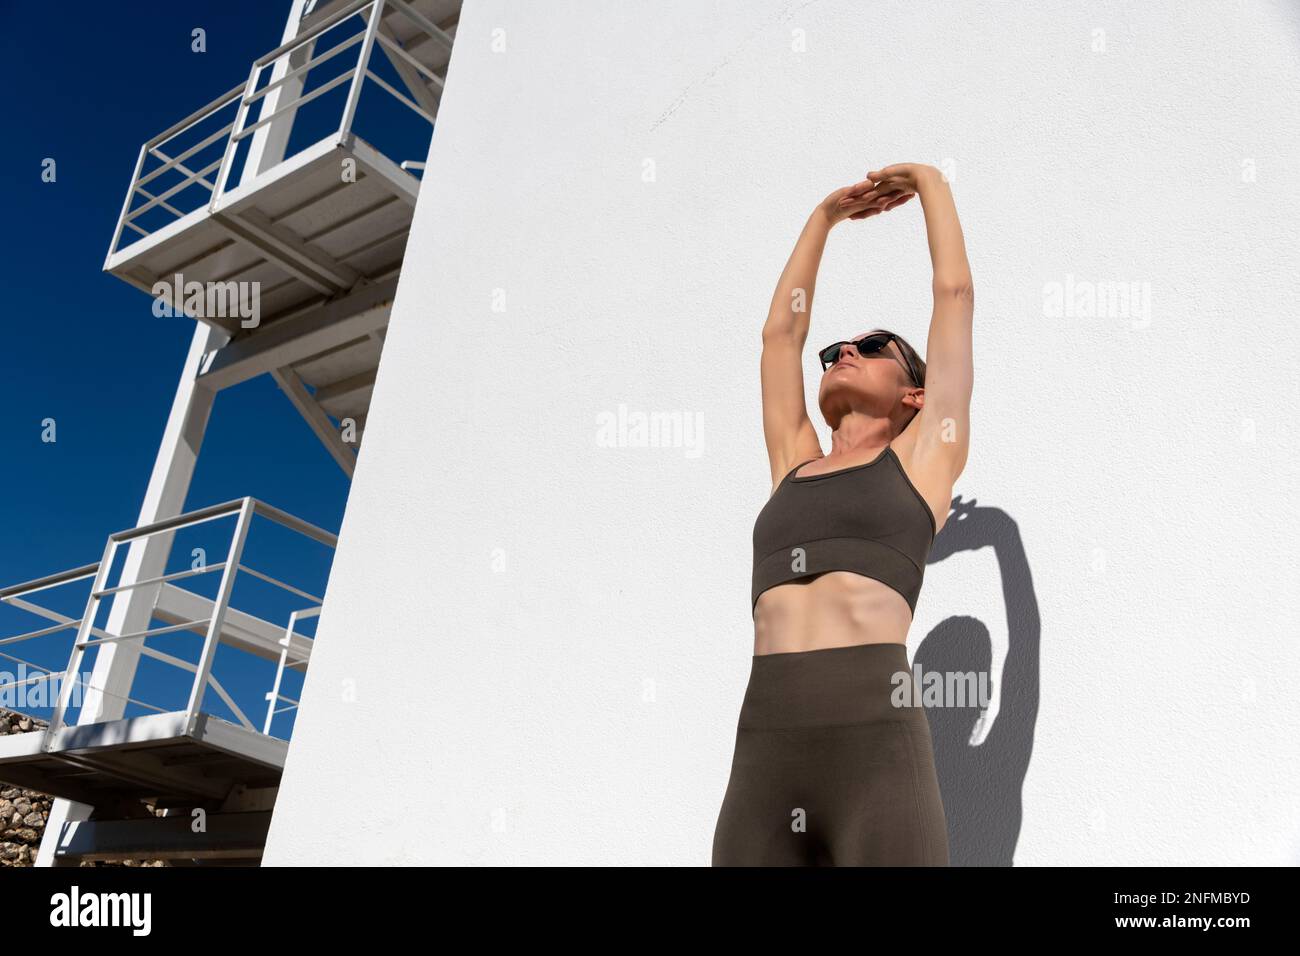 fit woman stretching arms before fitness workout Stock Photo